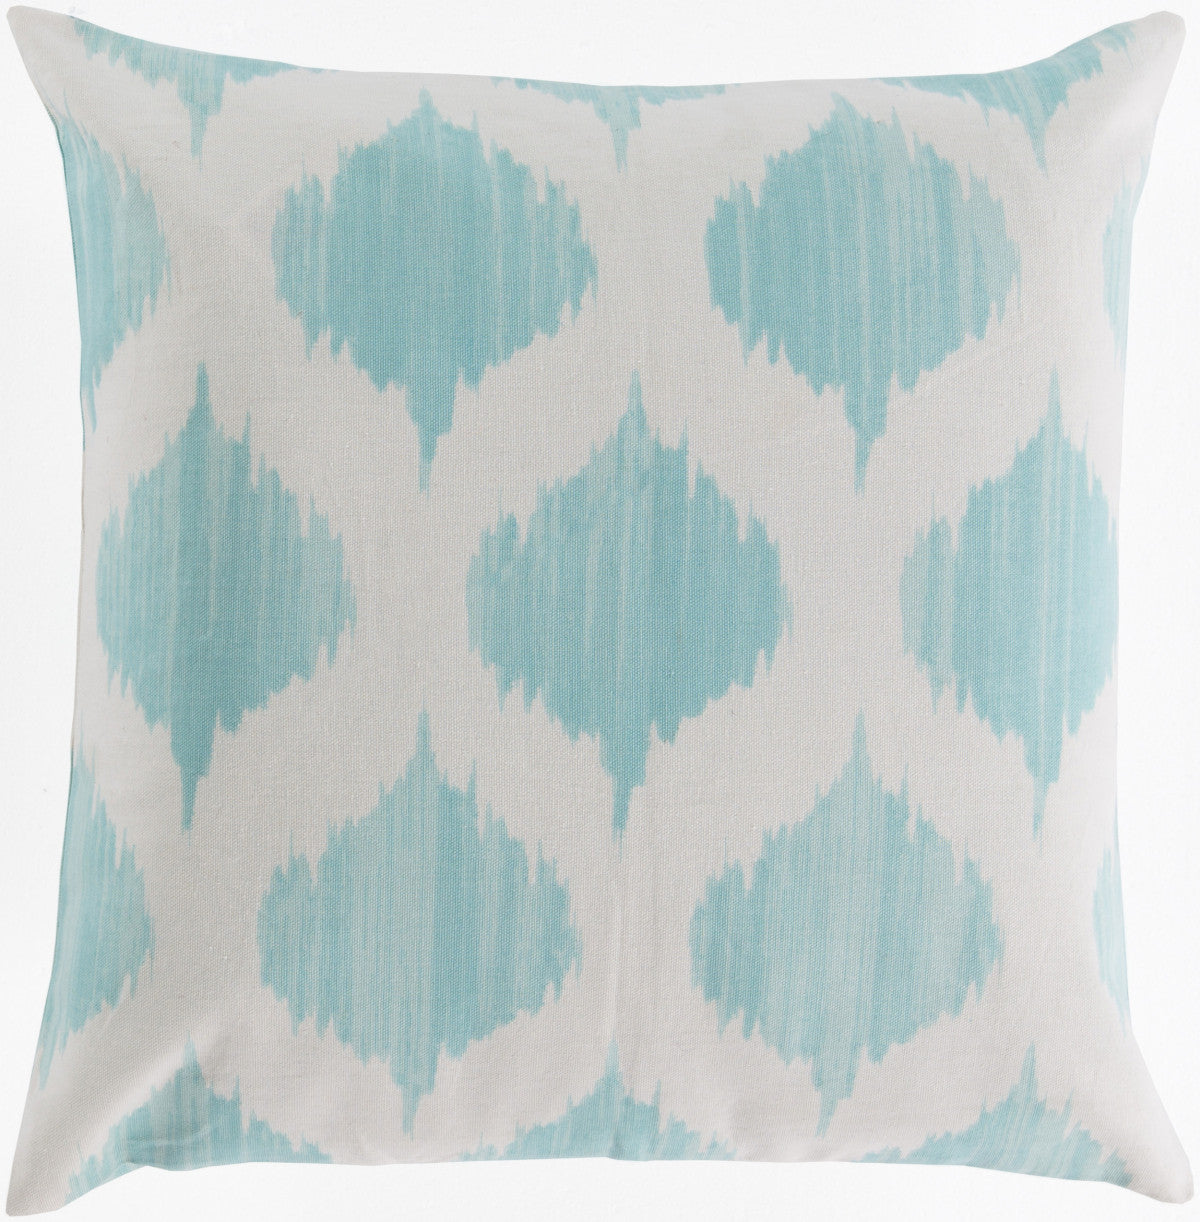 Surya Ogee Exquisite in Ikat SY-023 Pillow